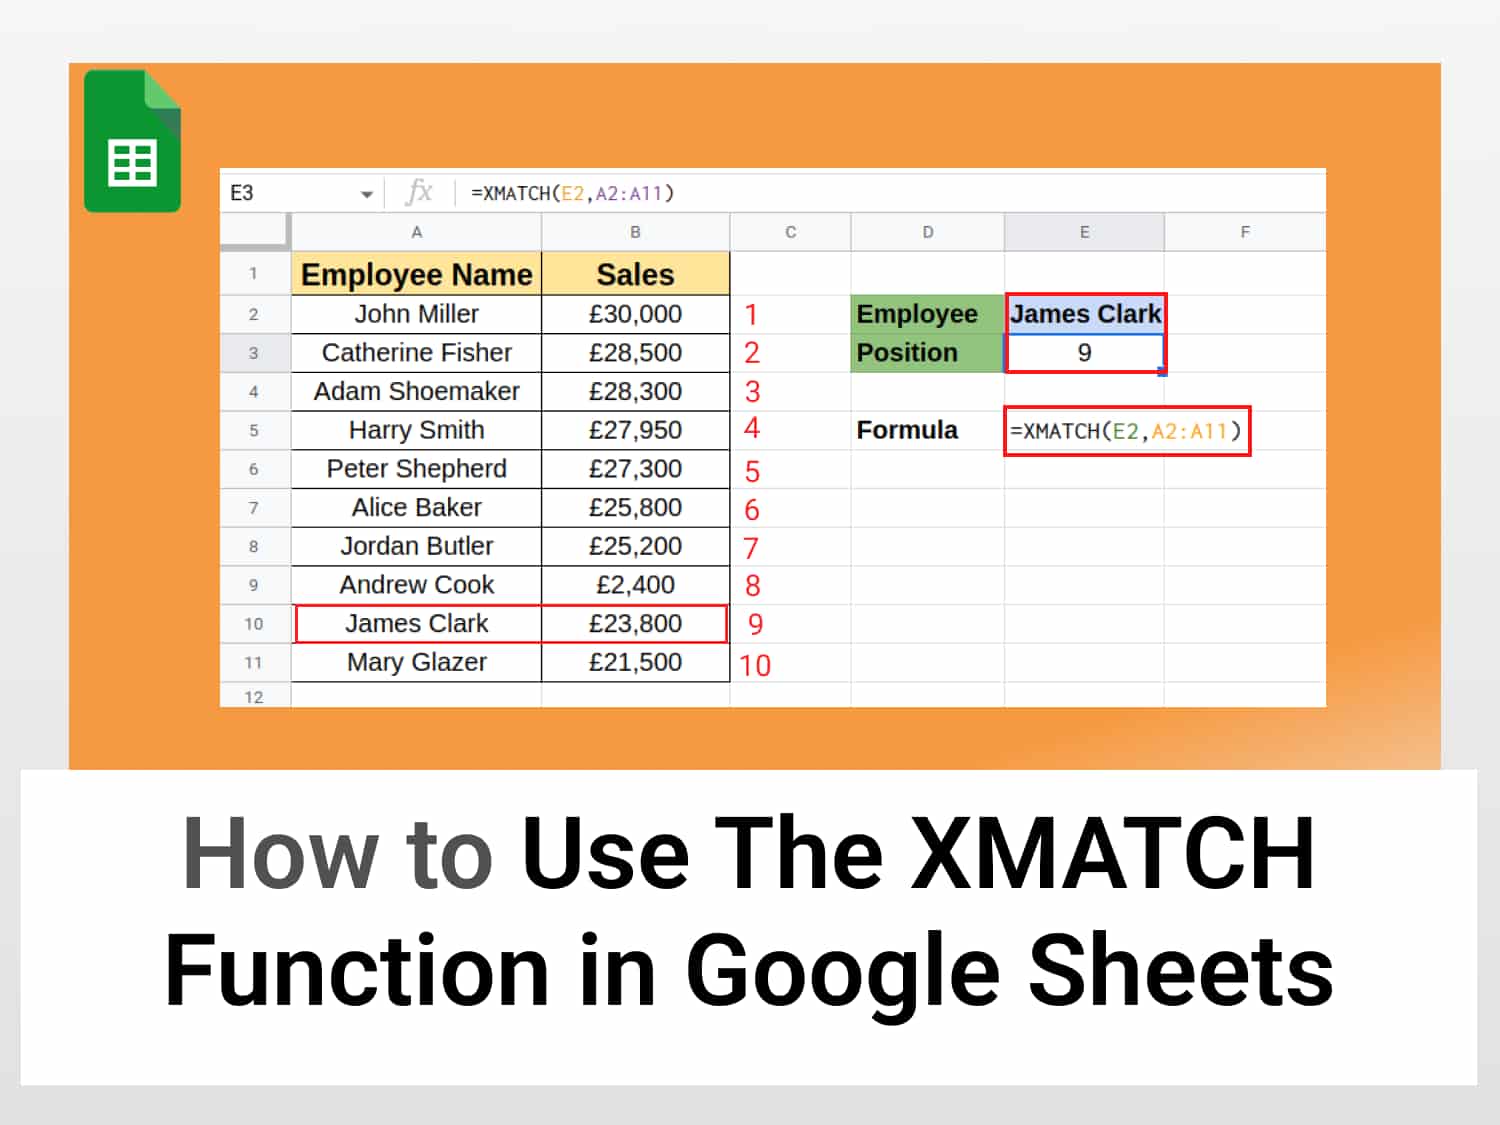 XMATCH function in Google Sheets